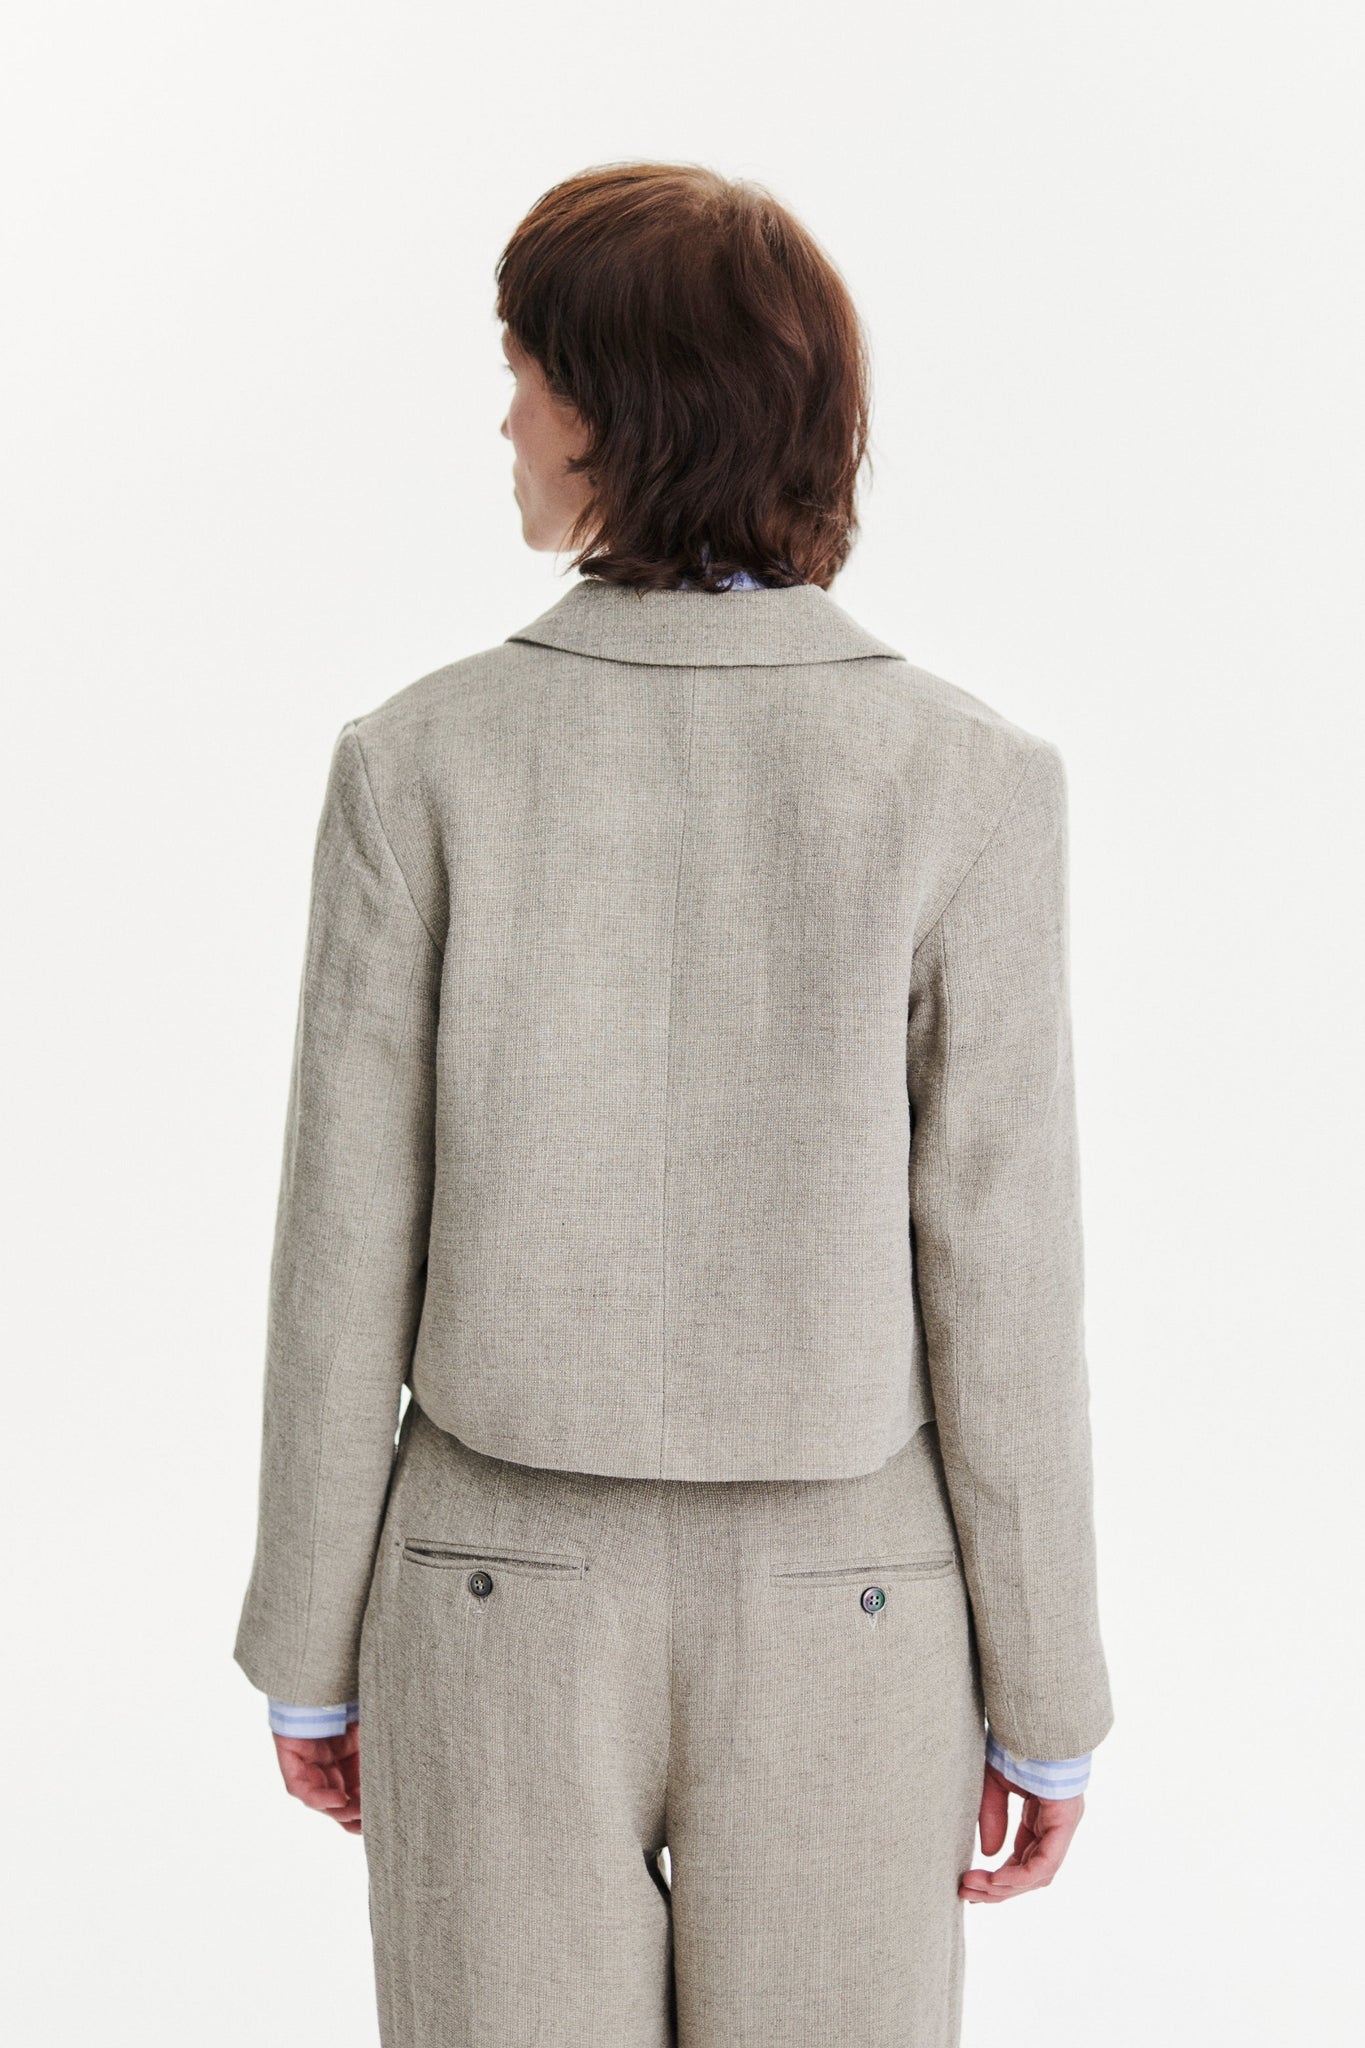 CROPPED JACKET IN A BEIGE FLUID AND STRUCTURED ITALIAN LINEN CREPE -beige